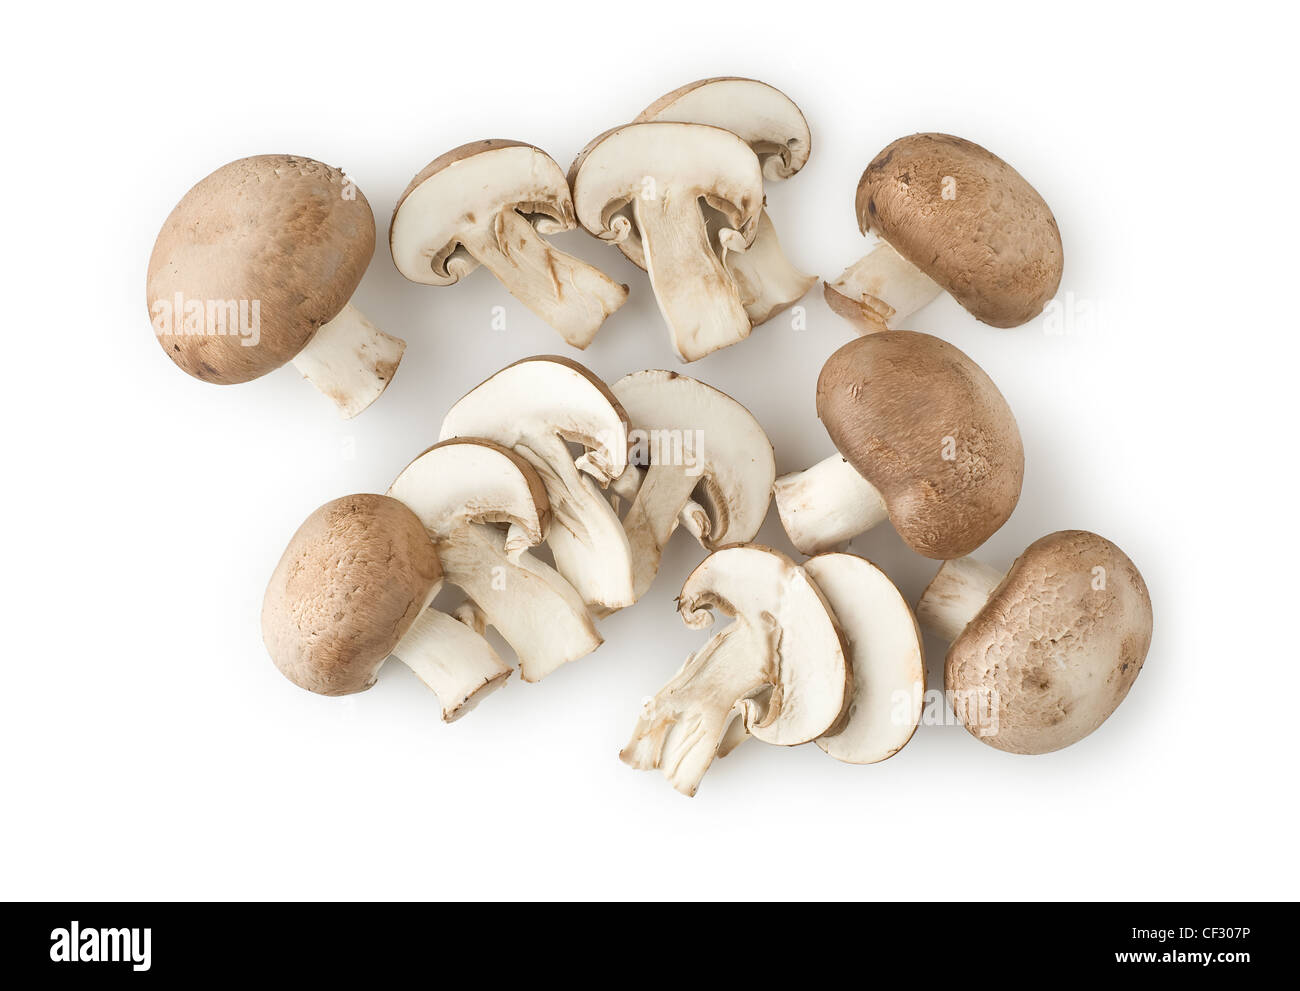 Mushrooms for a Healthy and Nutritious Cuisine Stock Photo